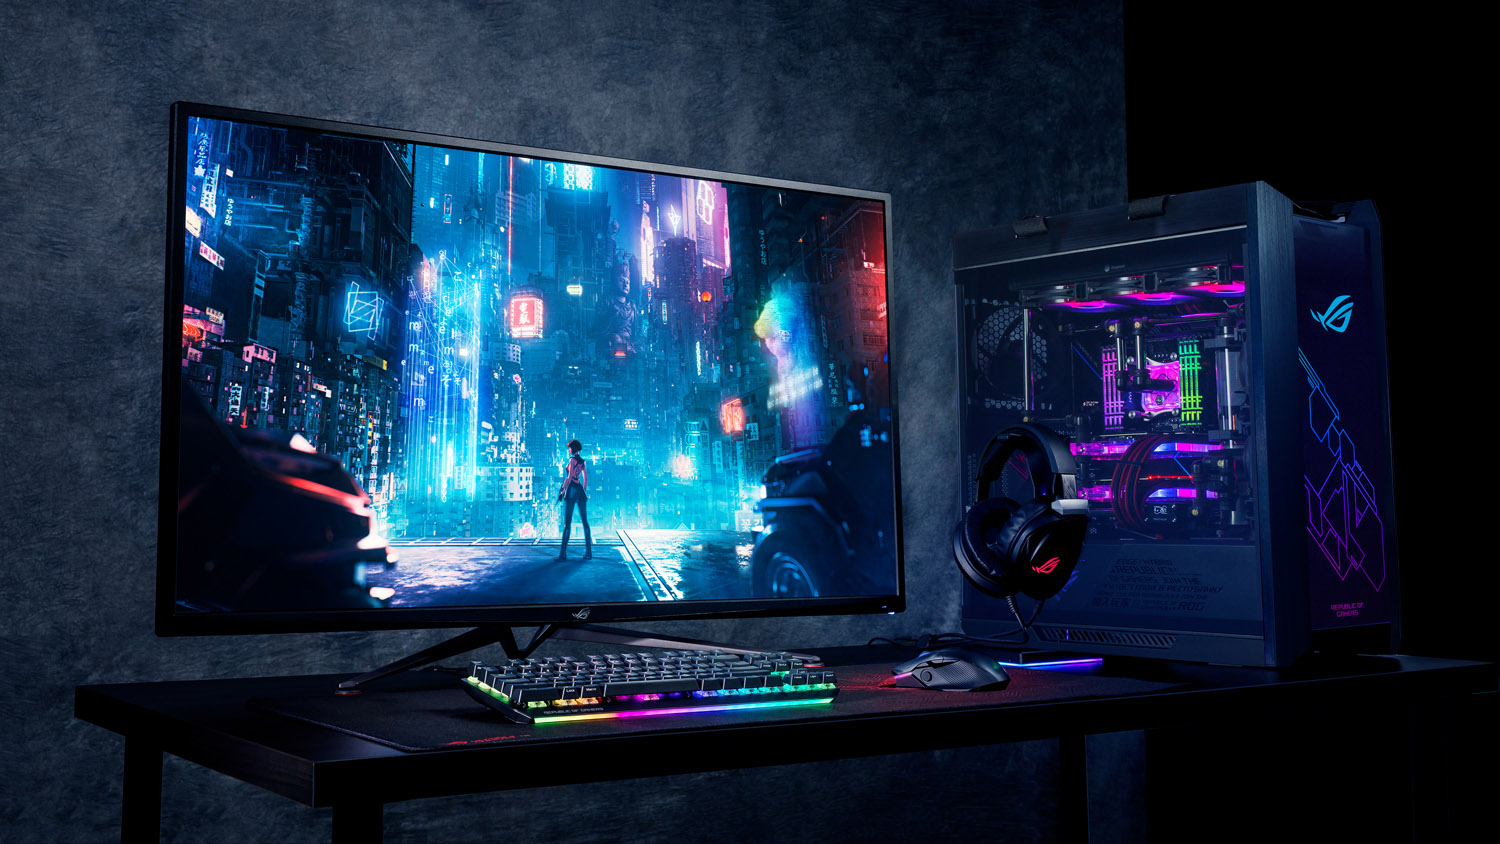 Settings guide: How to set up your new gaming monitor